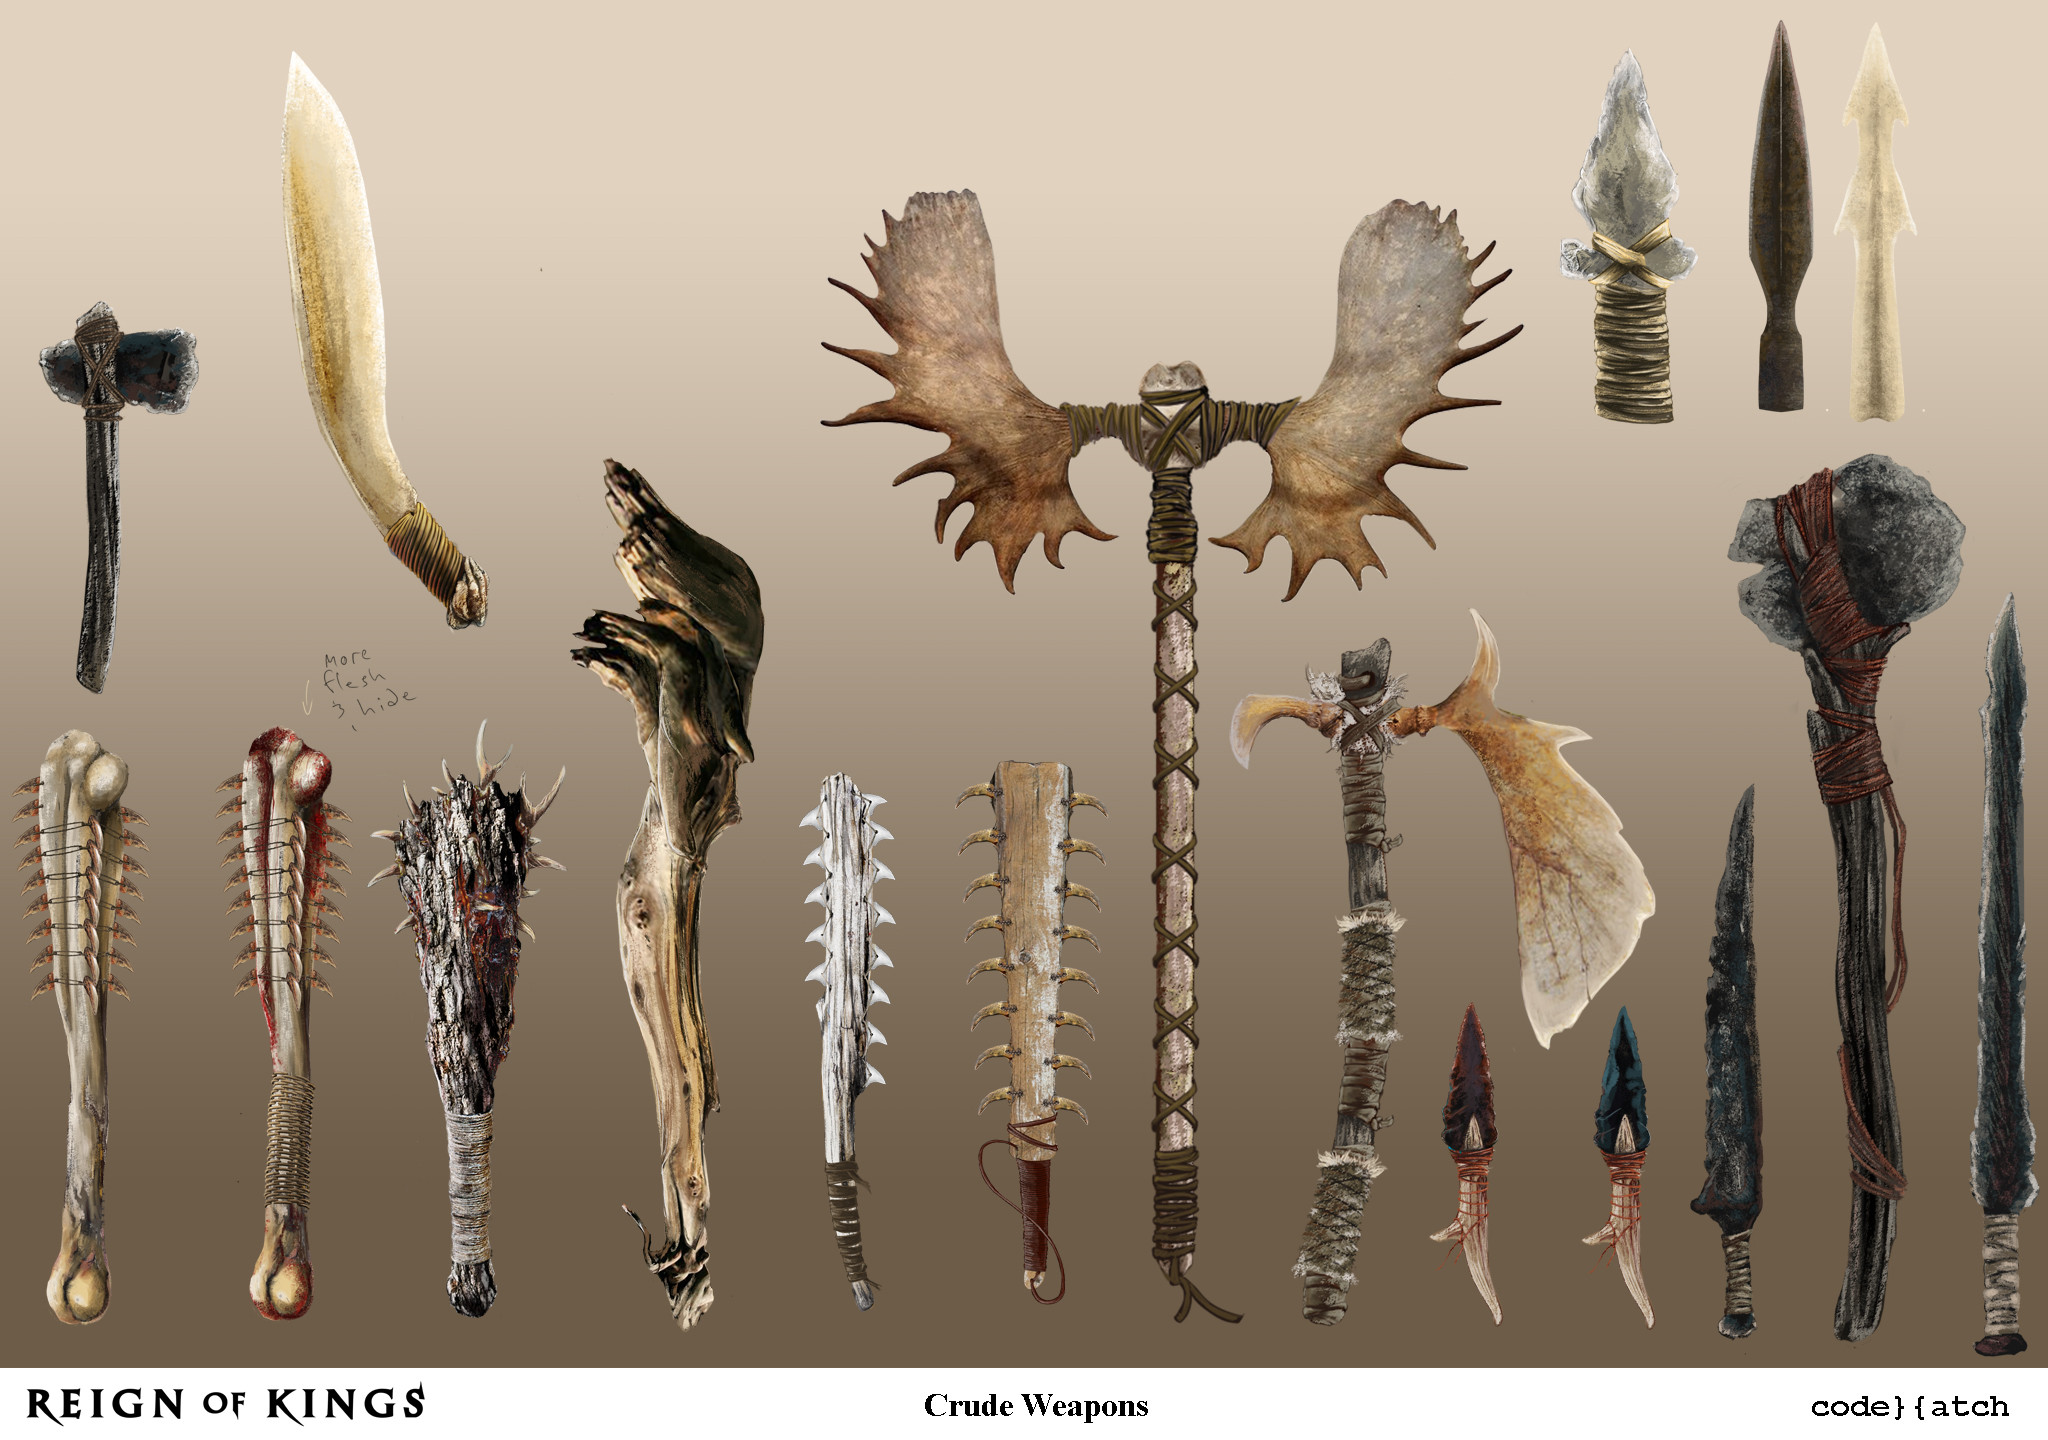 Some early tier weapons made from rough materials.